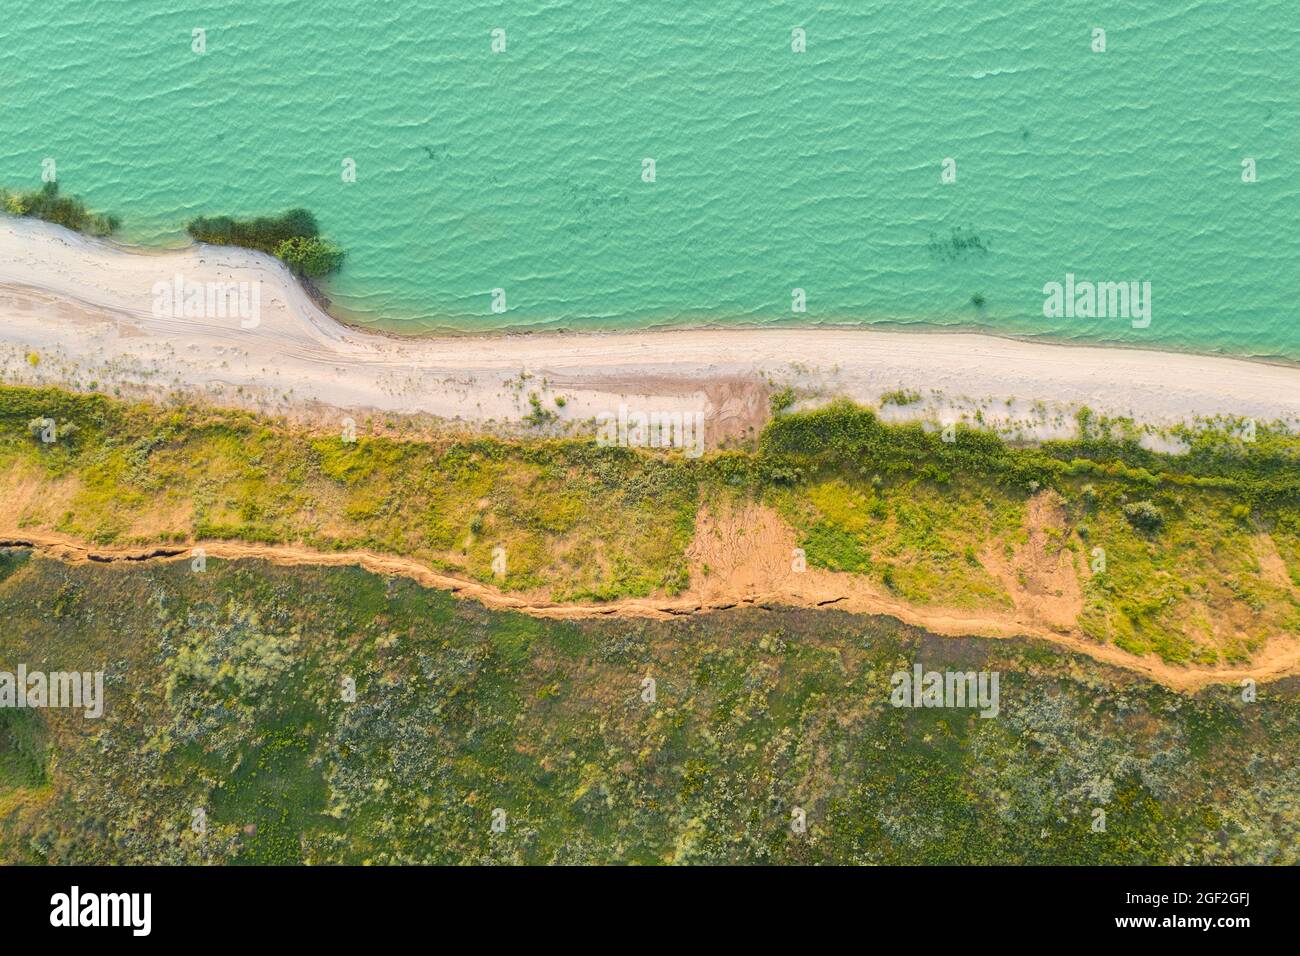 Sea coast. Aerial view of the beach and waves Stock Photo